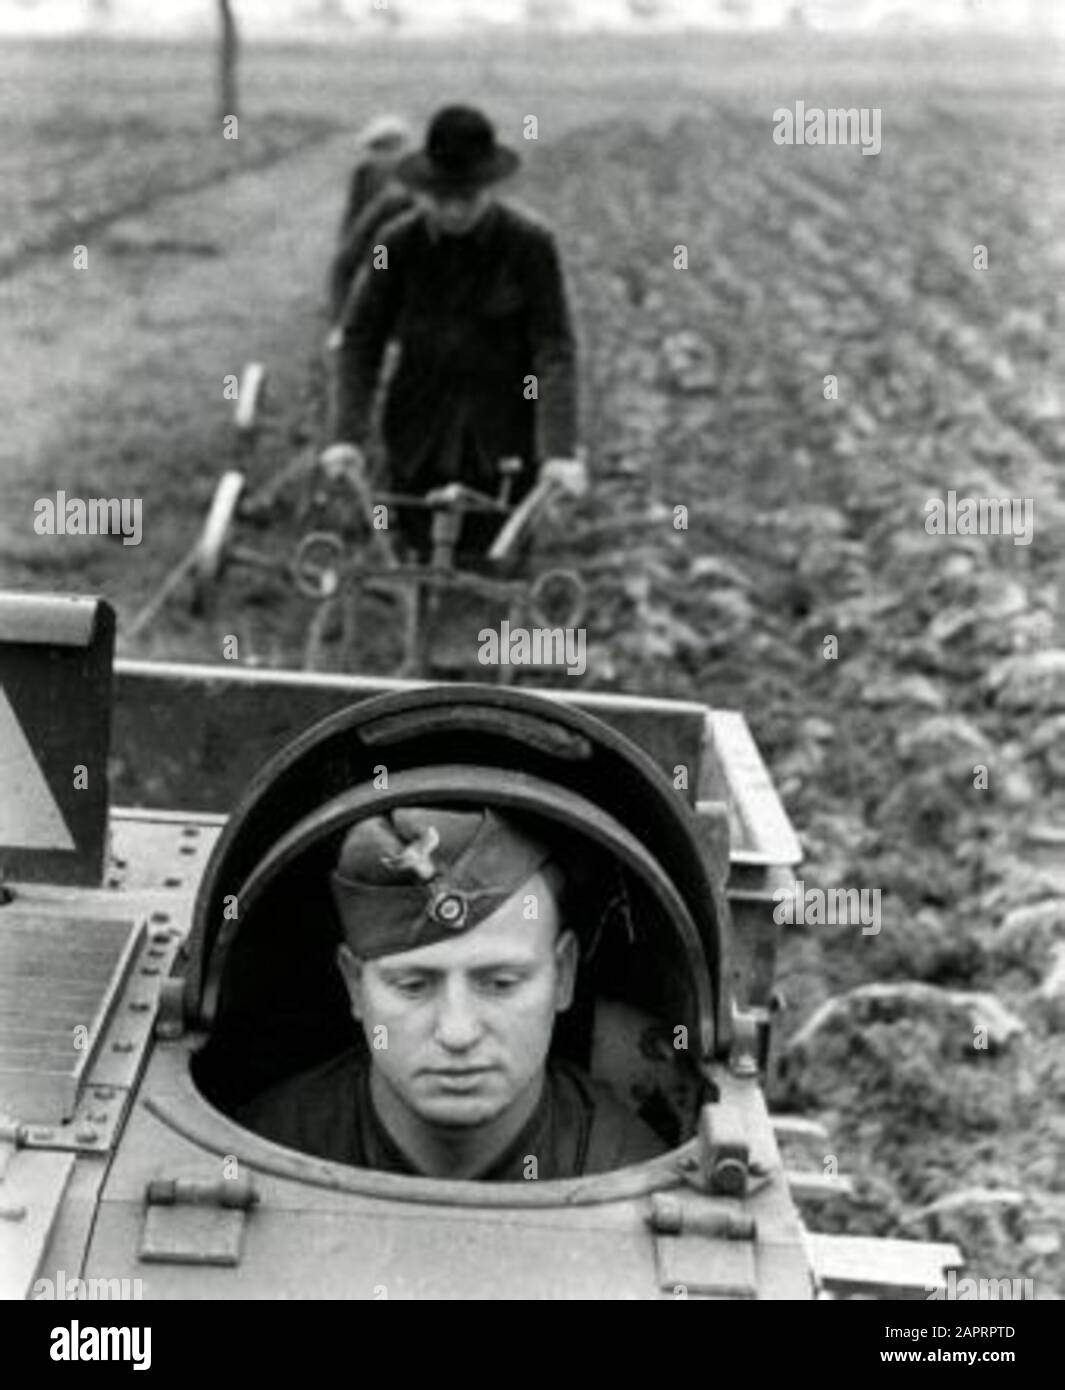 Spaarnestad Photo/SFA022804386 World War II. German soldier in tank-dome of tankette. The French farmers who run behind them get help from German soldiers with the plowing of the country. France, 1941. [Possibly a Renault UE made in France: an armored tractor, modified and used by the Germans]. Second World War. German soldier in a tank. [possible a Renault UE, a French made Armored Tractor or Infantry Supply Vehicle; designed for utility work, used and modified by the Germans]. German soldiers are helping the French farmers plough their fields. France, 1941; Stock Photo